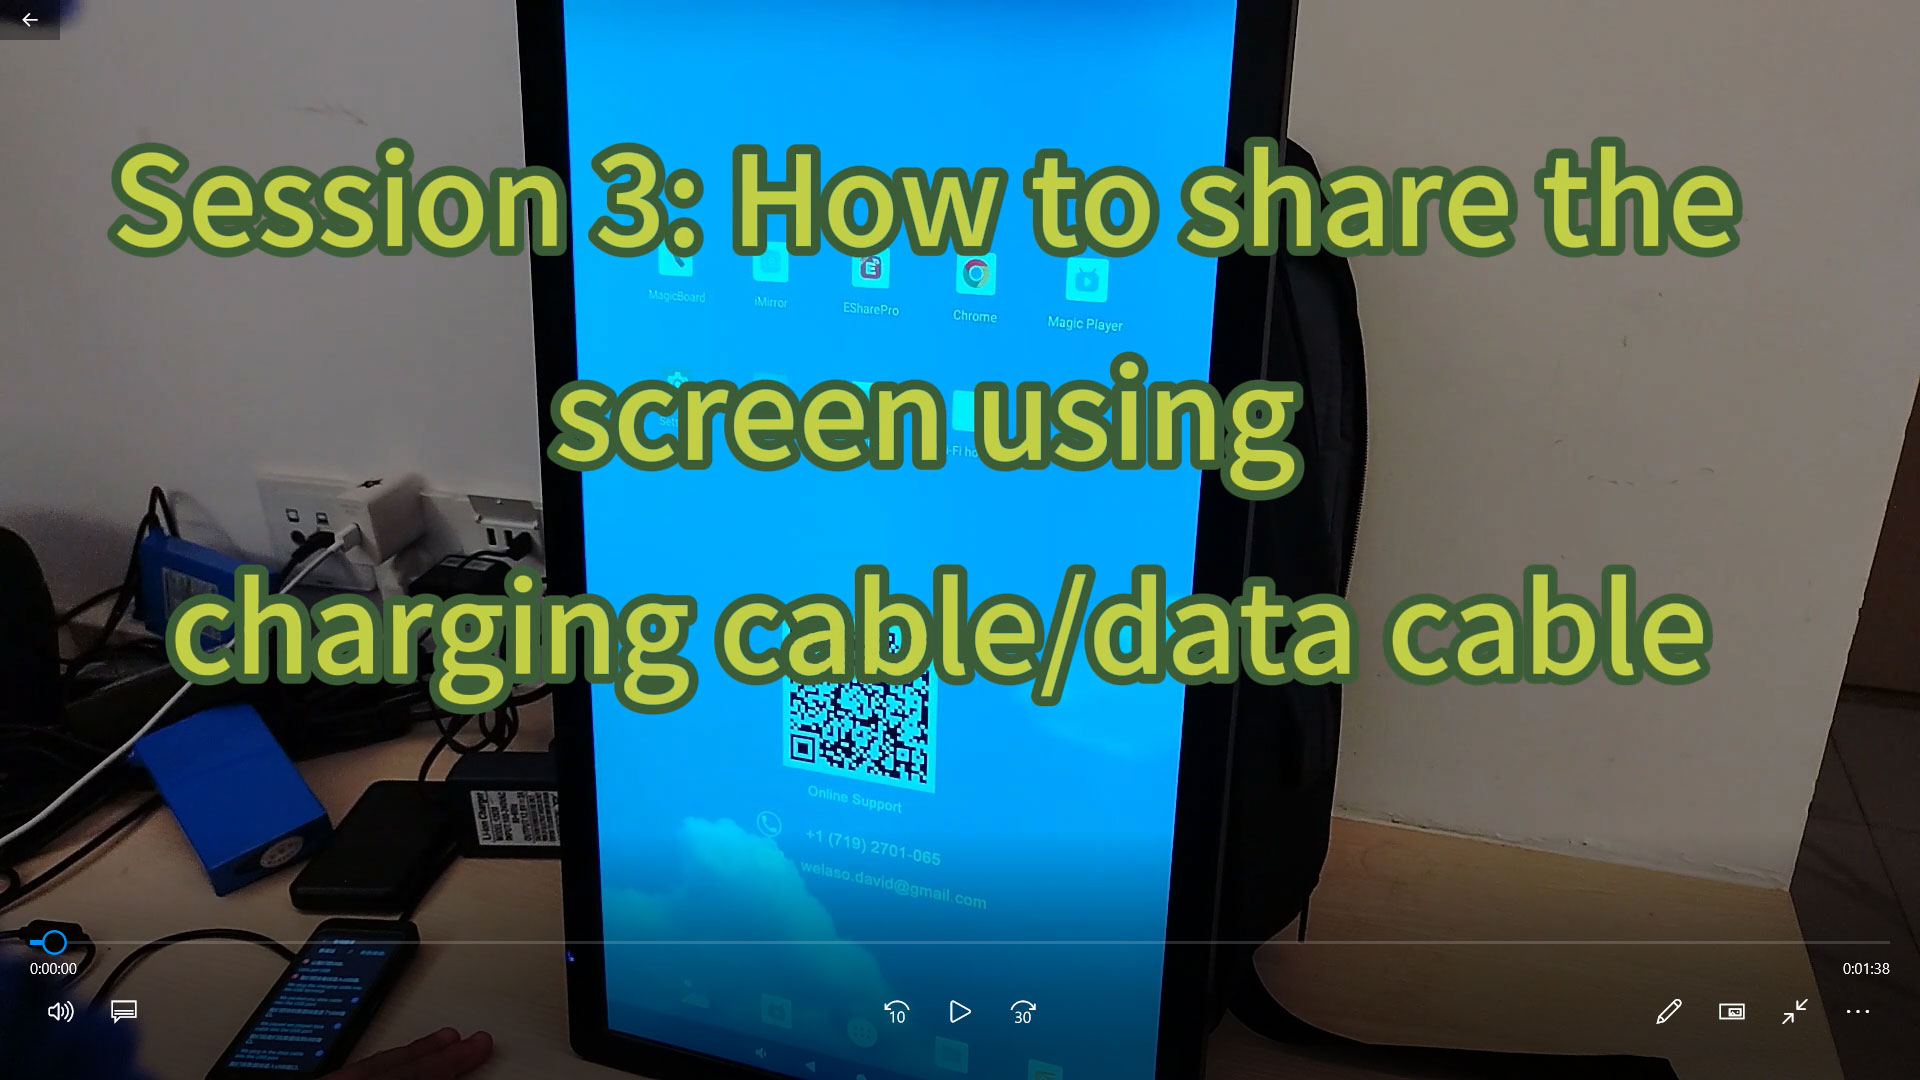 Session 3: How to share your phone's screen using your smartphone's charging/data cable.